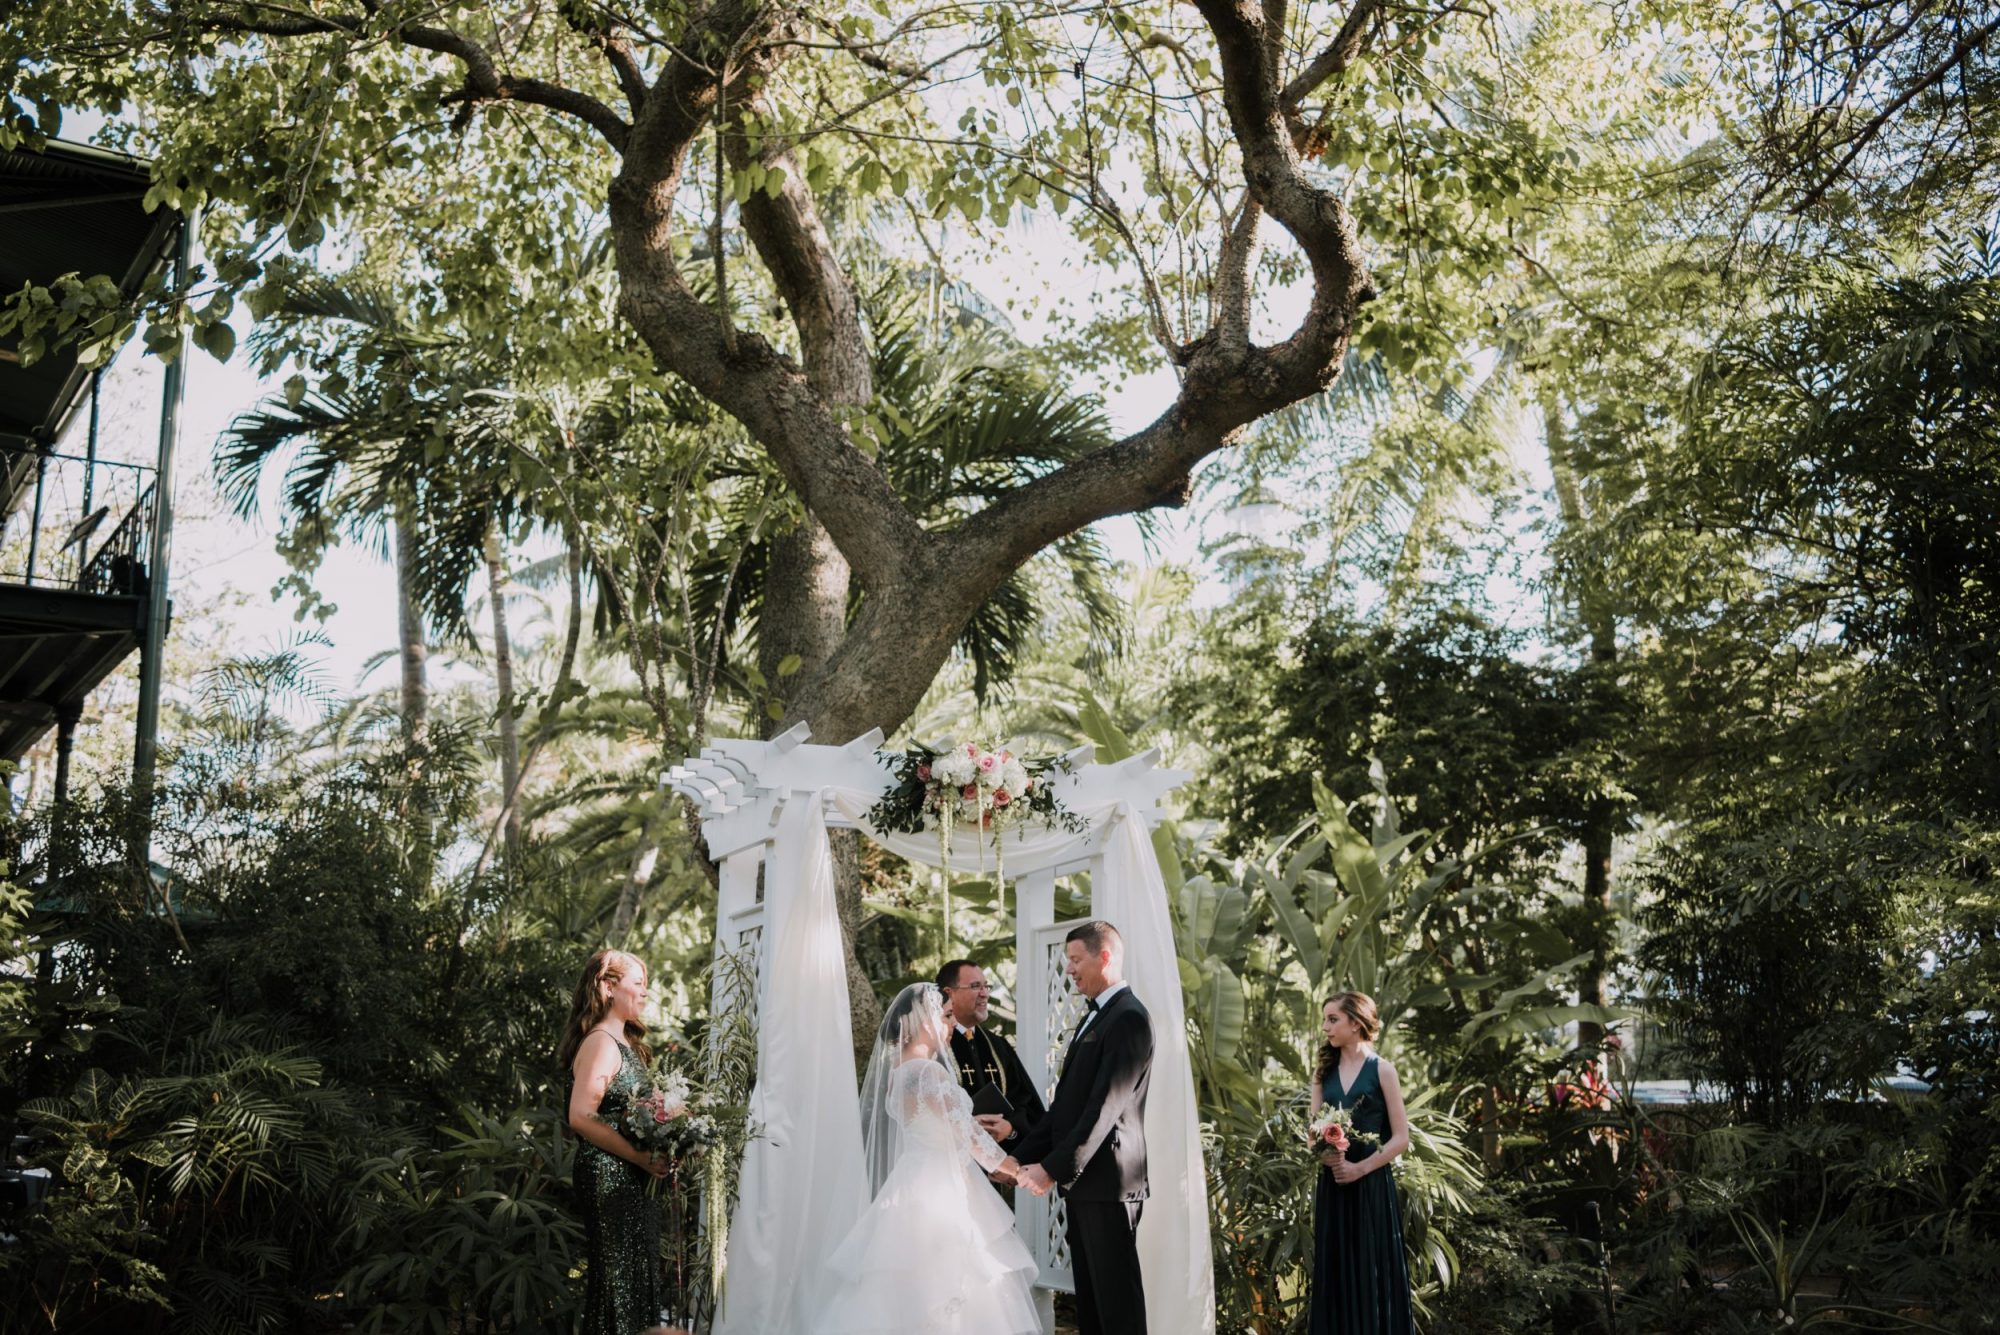 A vintage Hollywood couple standing under a tree at their Key West wedding ceremony.